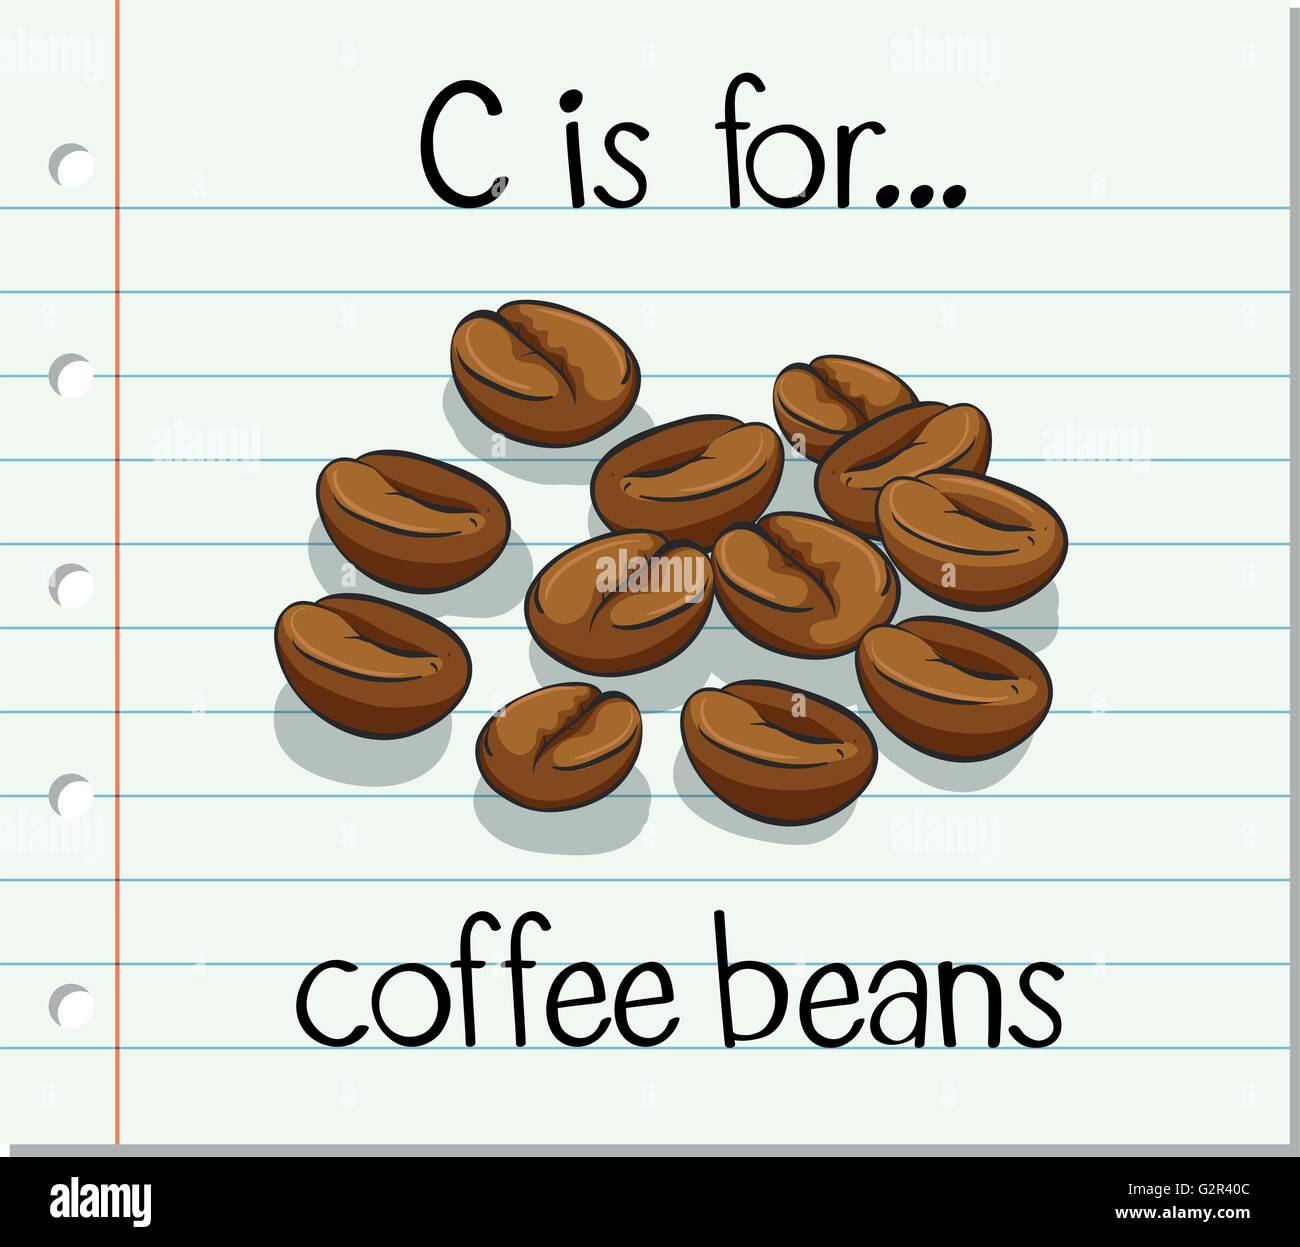 Flashcard letter C is for coffee beans illustration Stock Vector